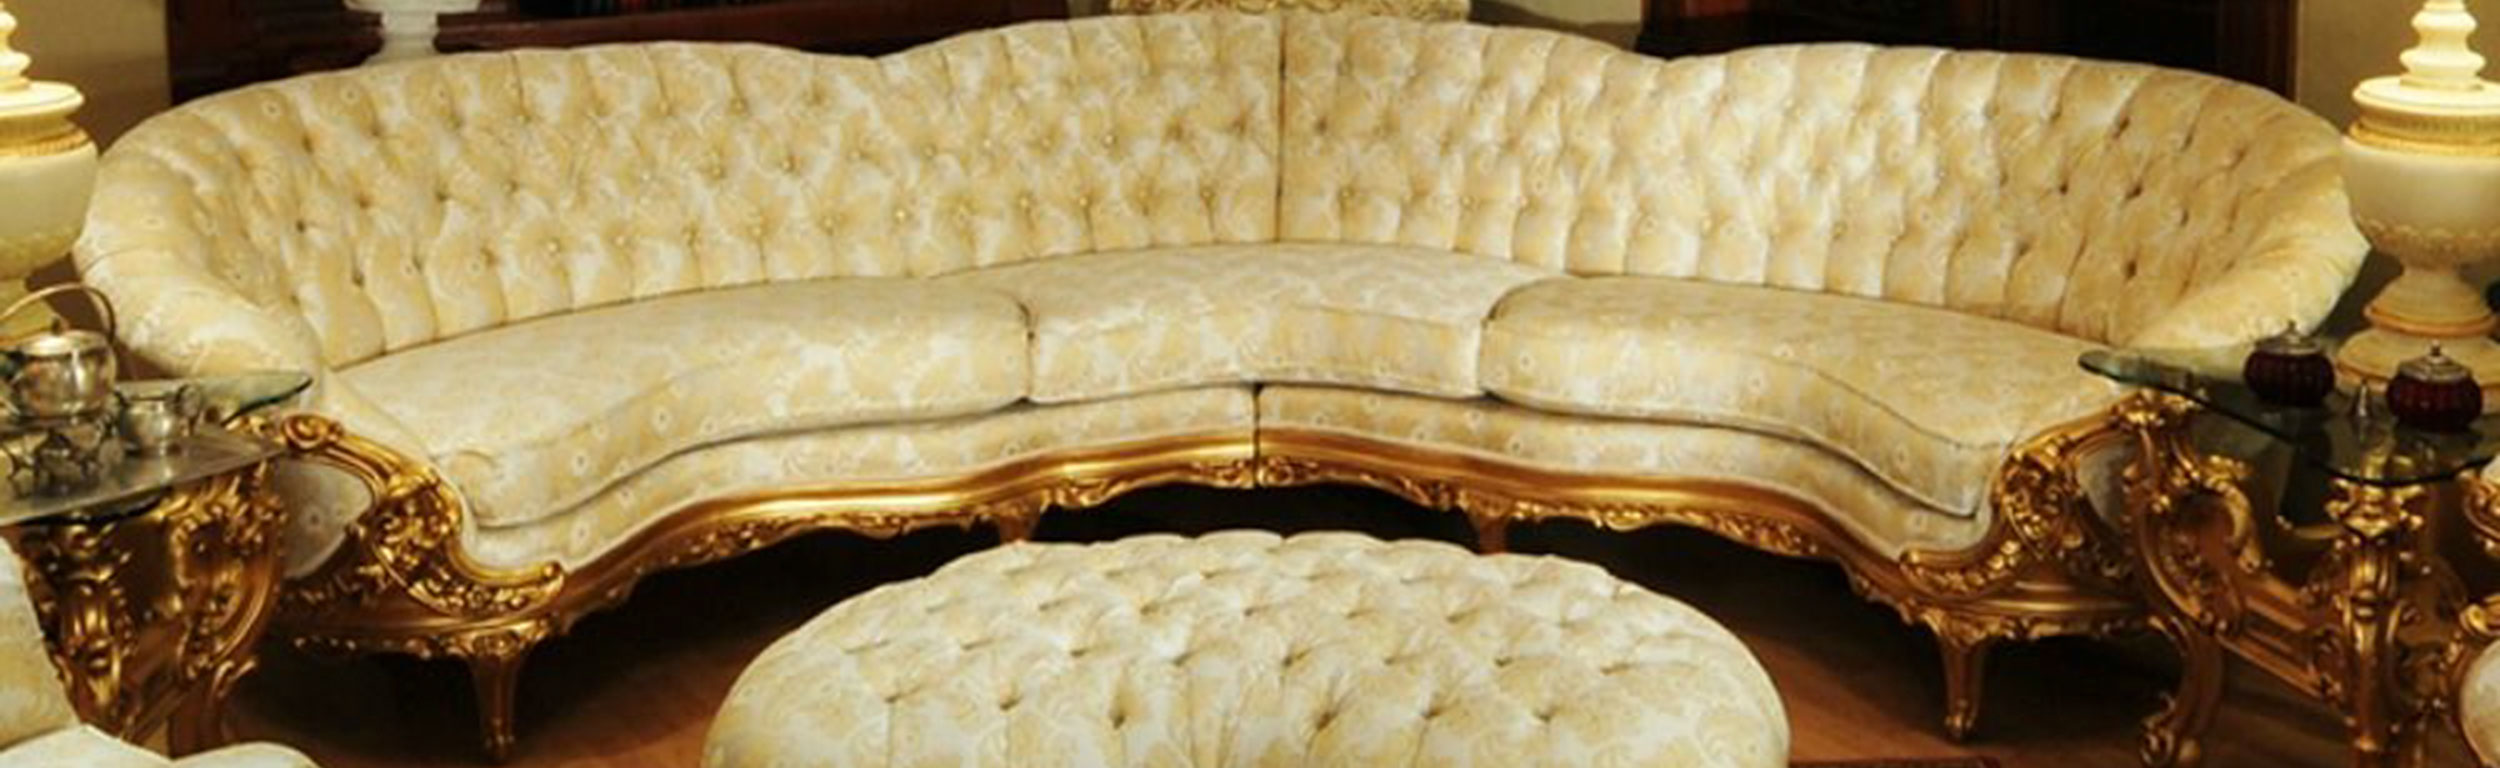 Don Green Upholstery Piedmont (864)277-3795